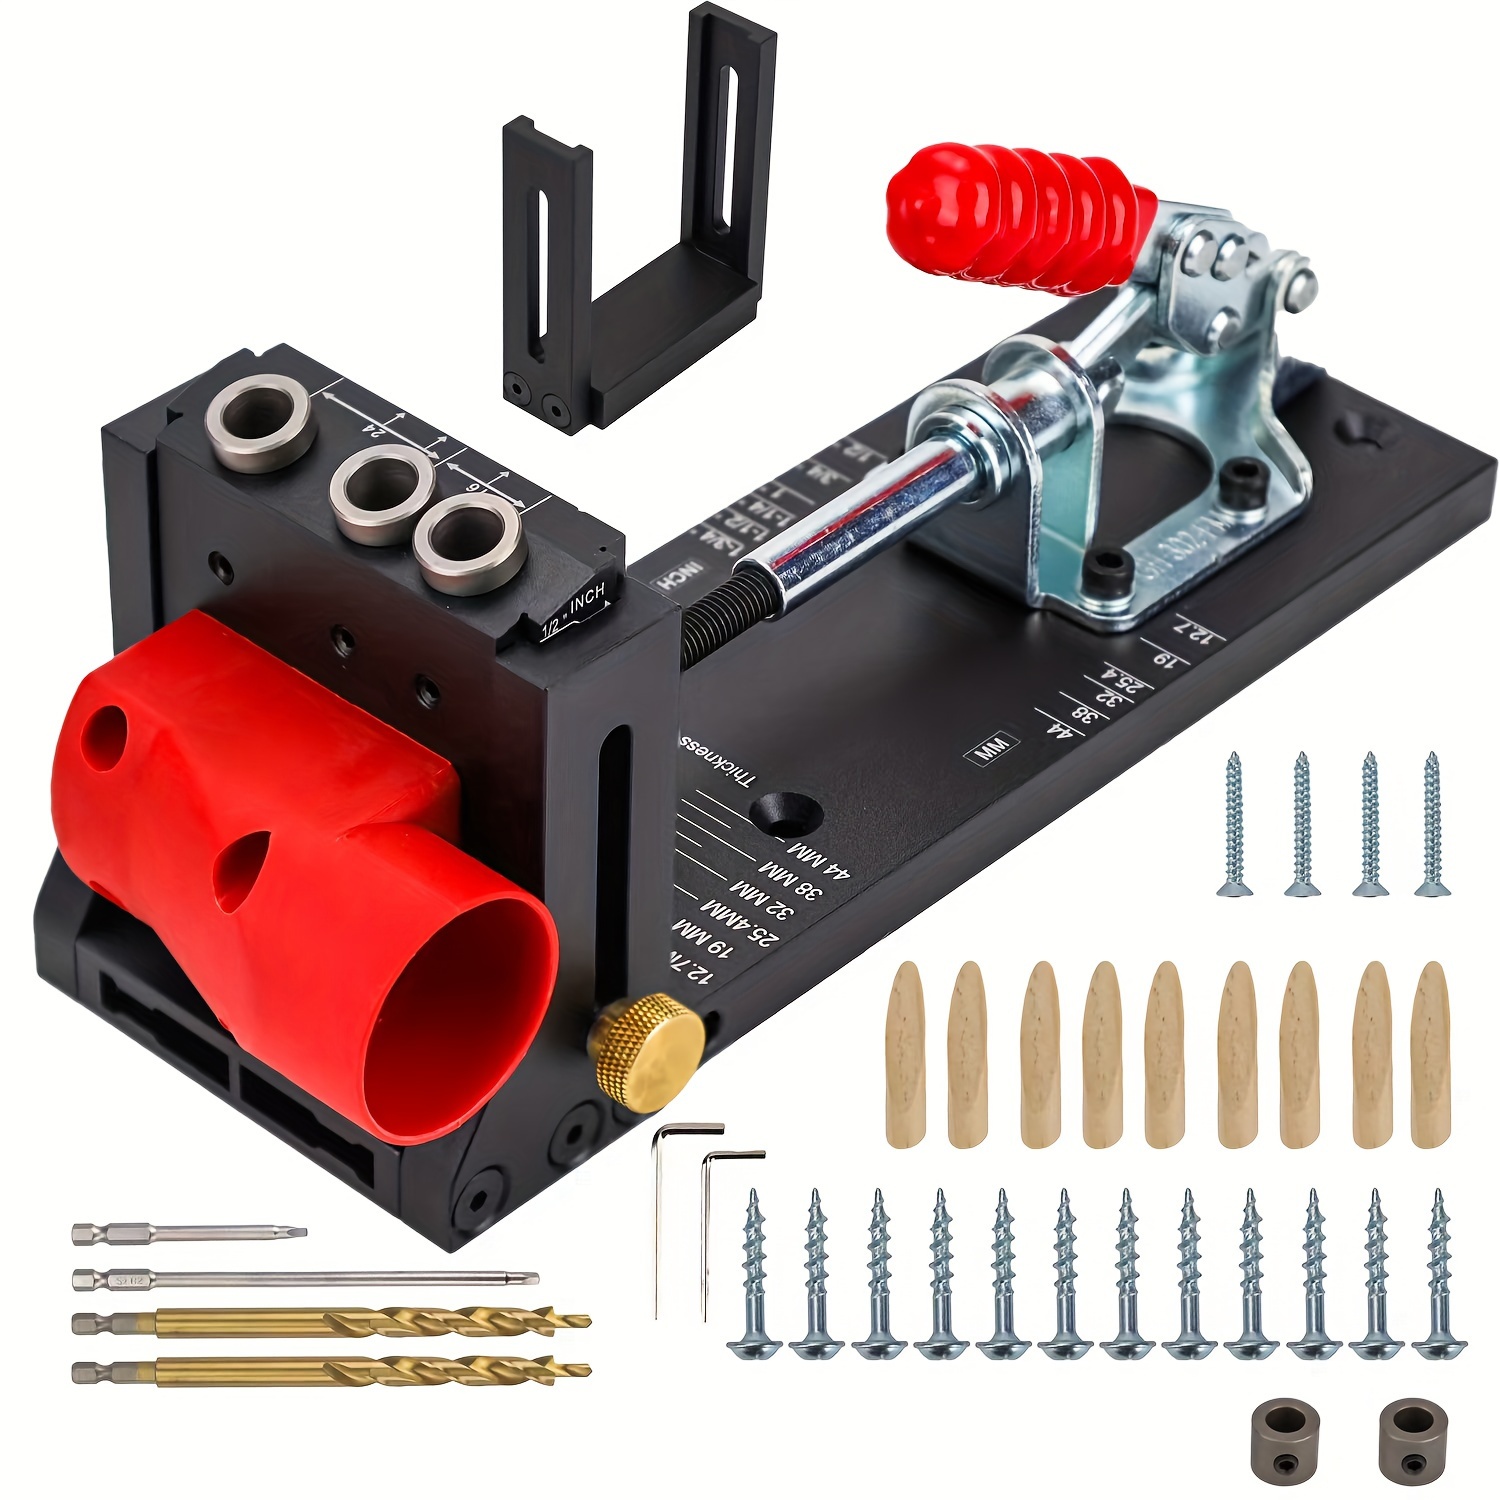 

1pc 3-hole Aluminum Alloy Pocket Hole Jig System With Dust Collection Port Xk4, Metal Woodworking Angle Drilling Guide, Measurement In Inches And Metric